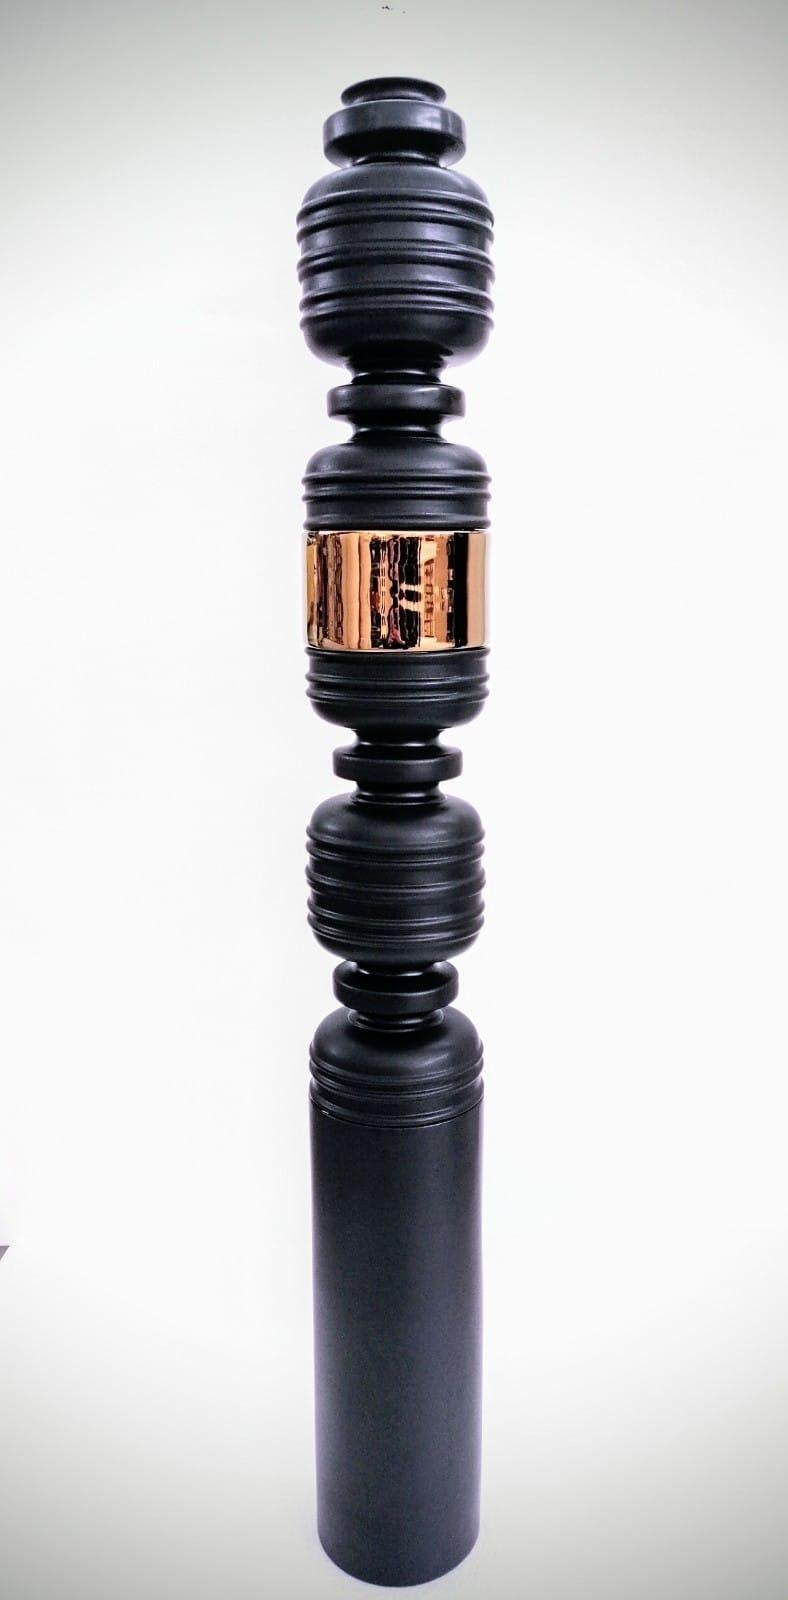 Hand-Crafted THEA4, Ceramic Vase Handcrafted in 24-Karat Gold and Black by Gabriella B. For Sale